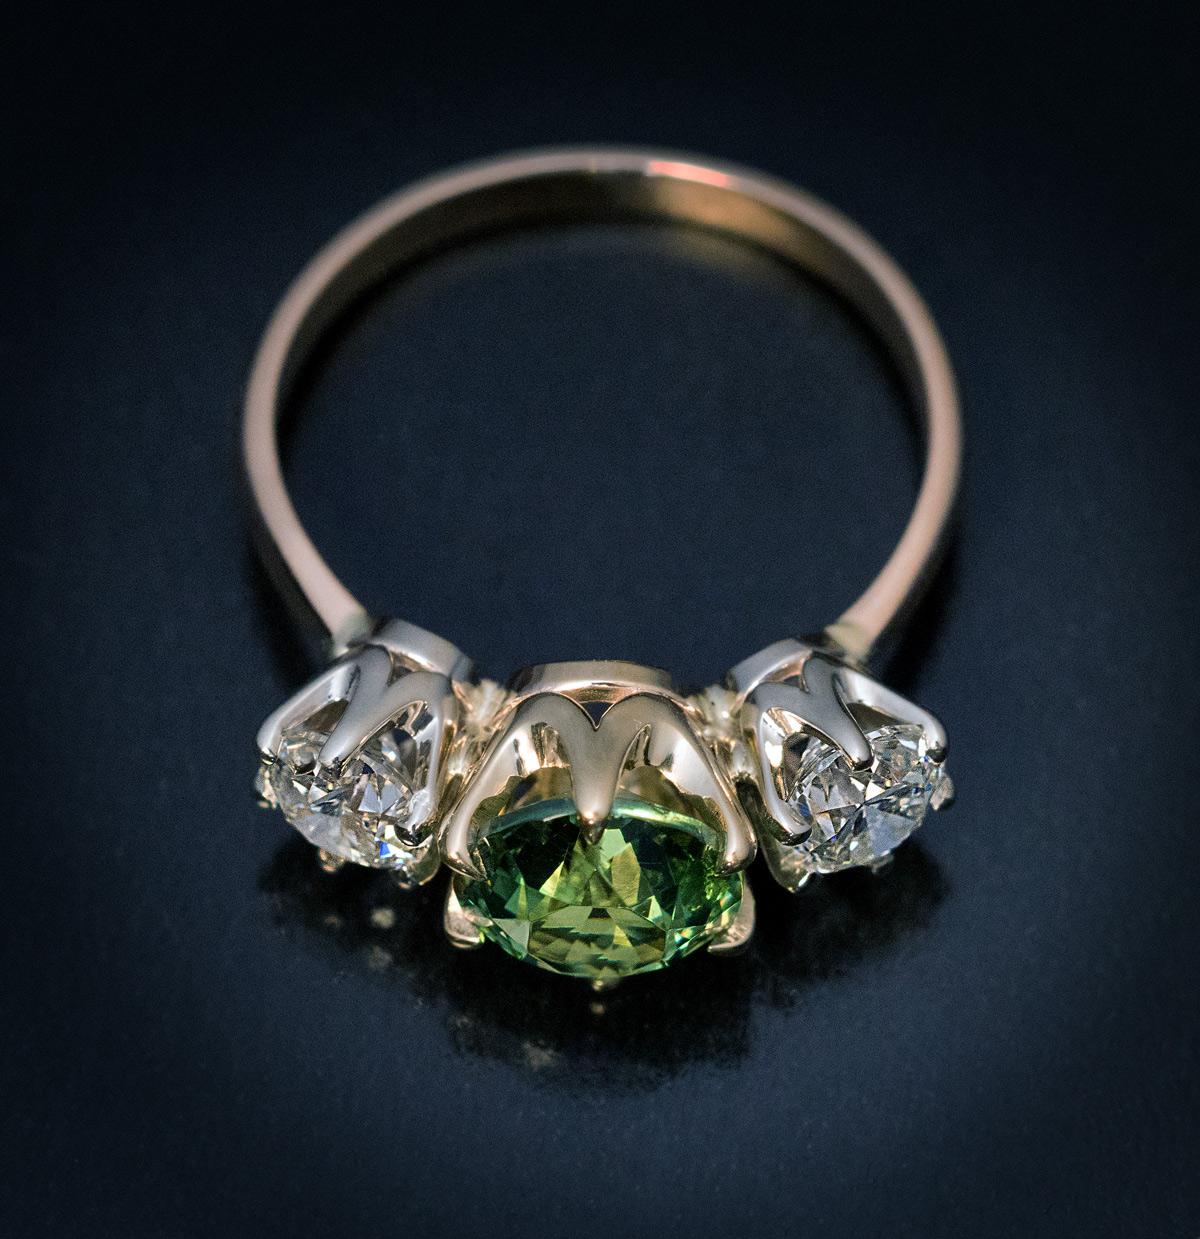 Circa 1950s

A vintage Russian 14K gold three-stone ring is centered with a rare 1.96 ct brilliant cut demantoid from the Ural Mountains of an excellent golden green color. The center stone is flanked by two o.51 ct bright white diamonds (G color,